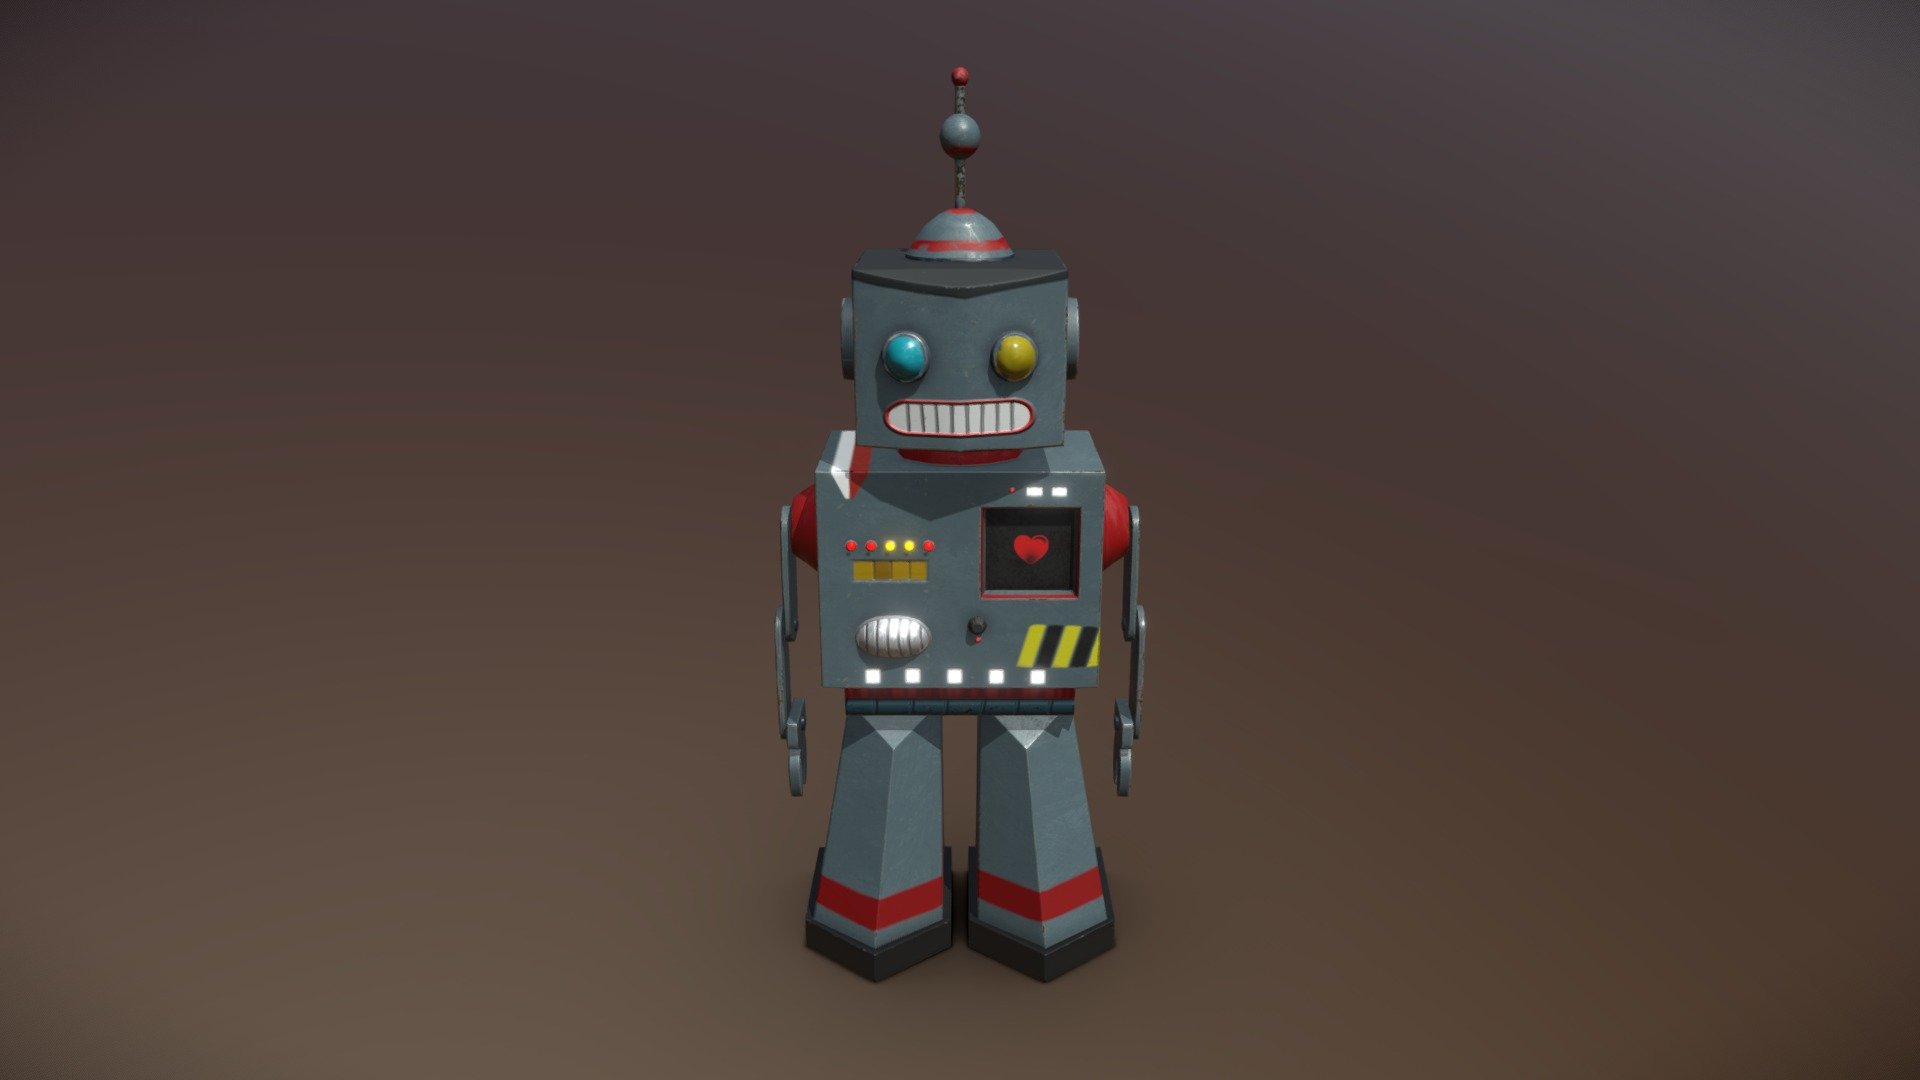 Toy Robot for VR game - 3D model by Freccialata [5955f8f] - Sketchfab